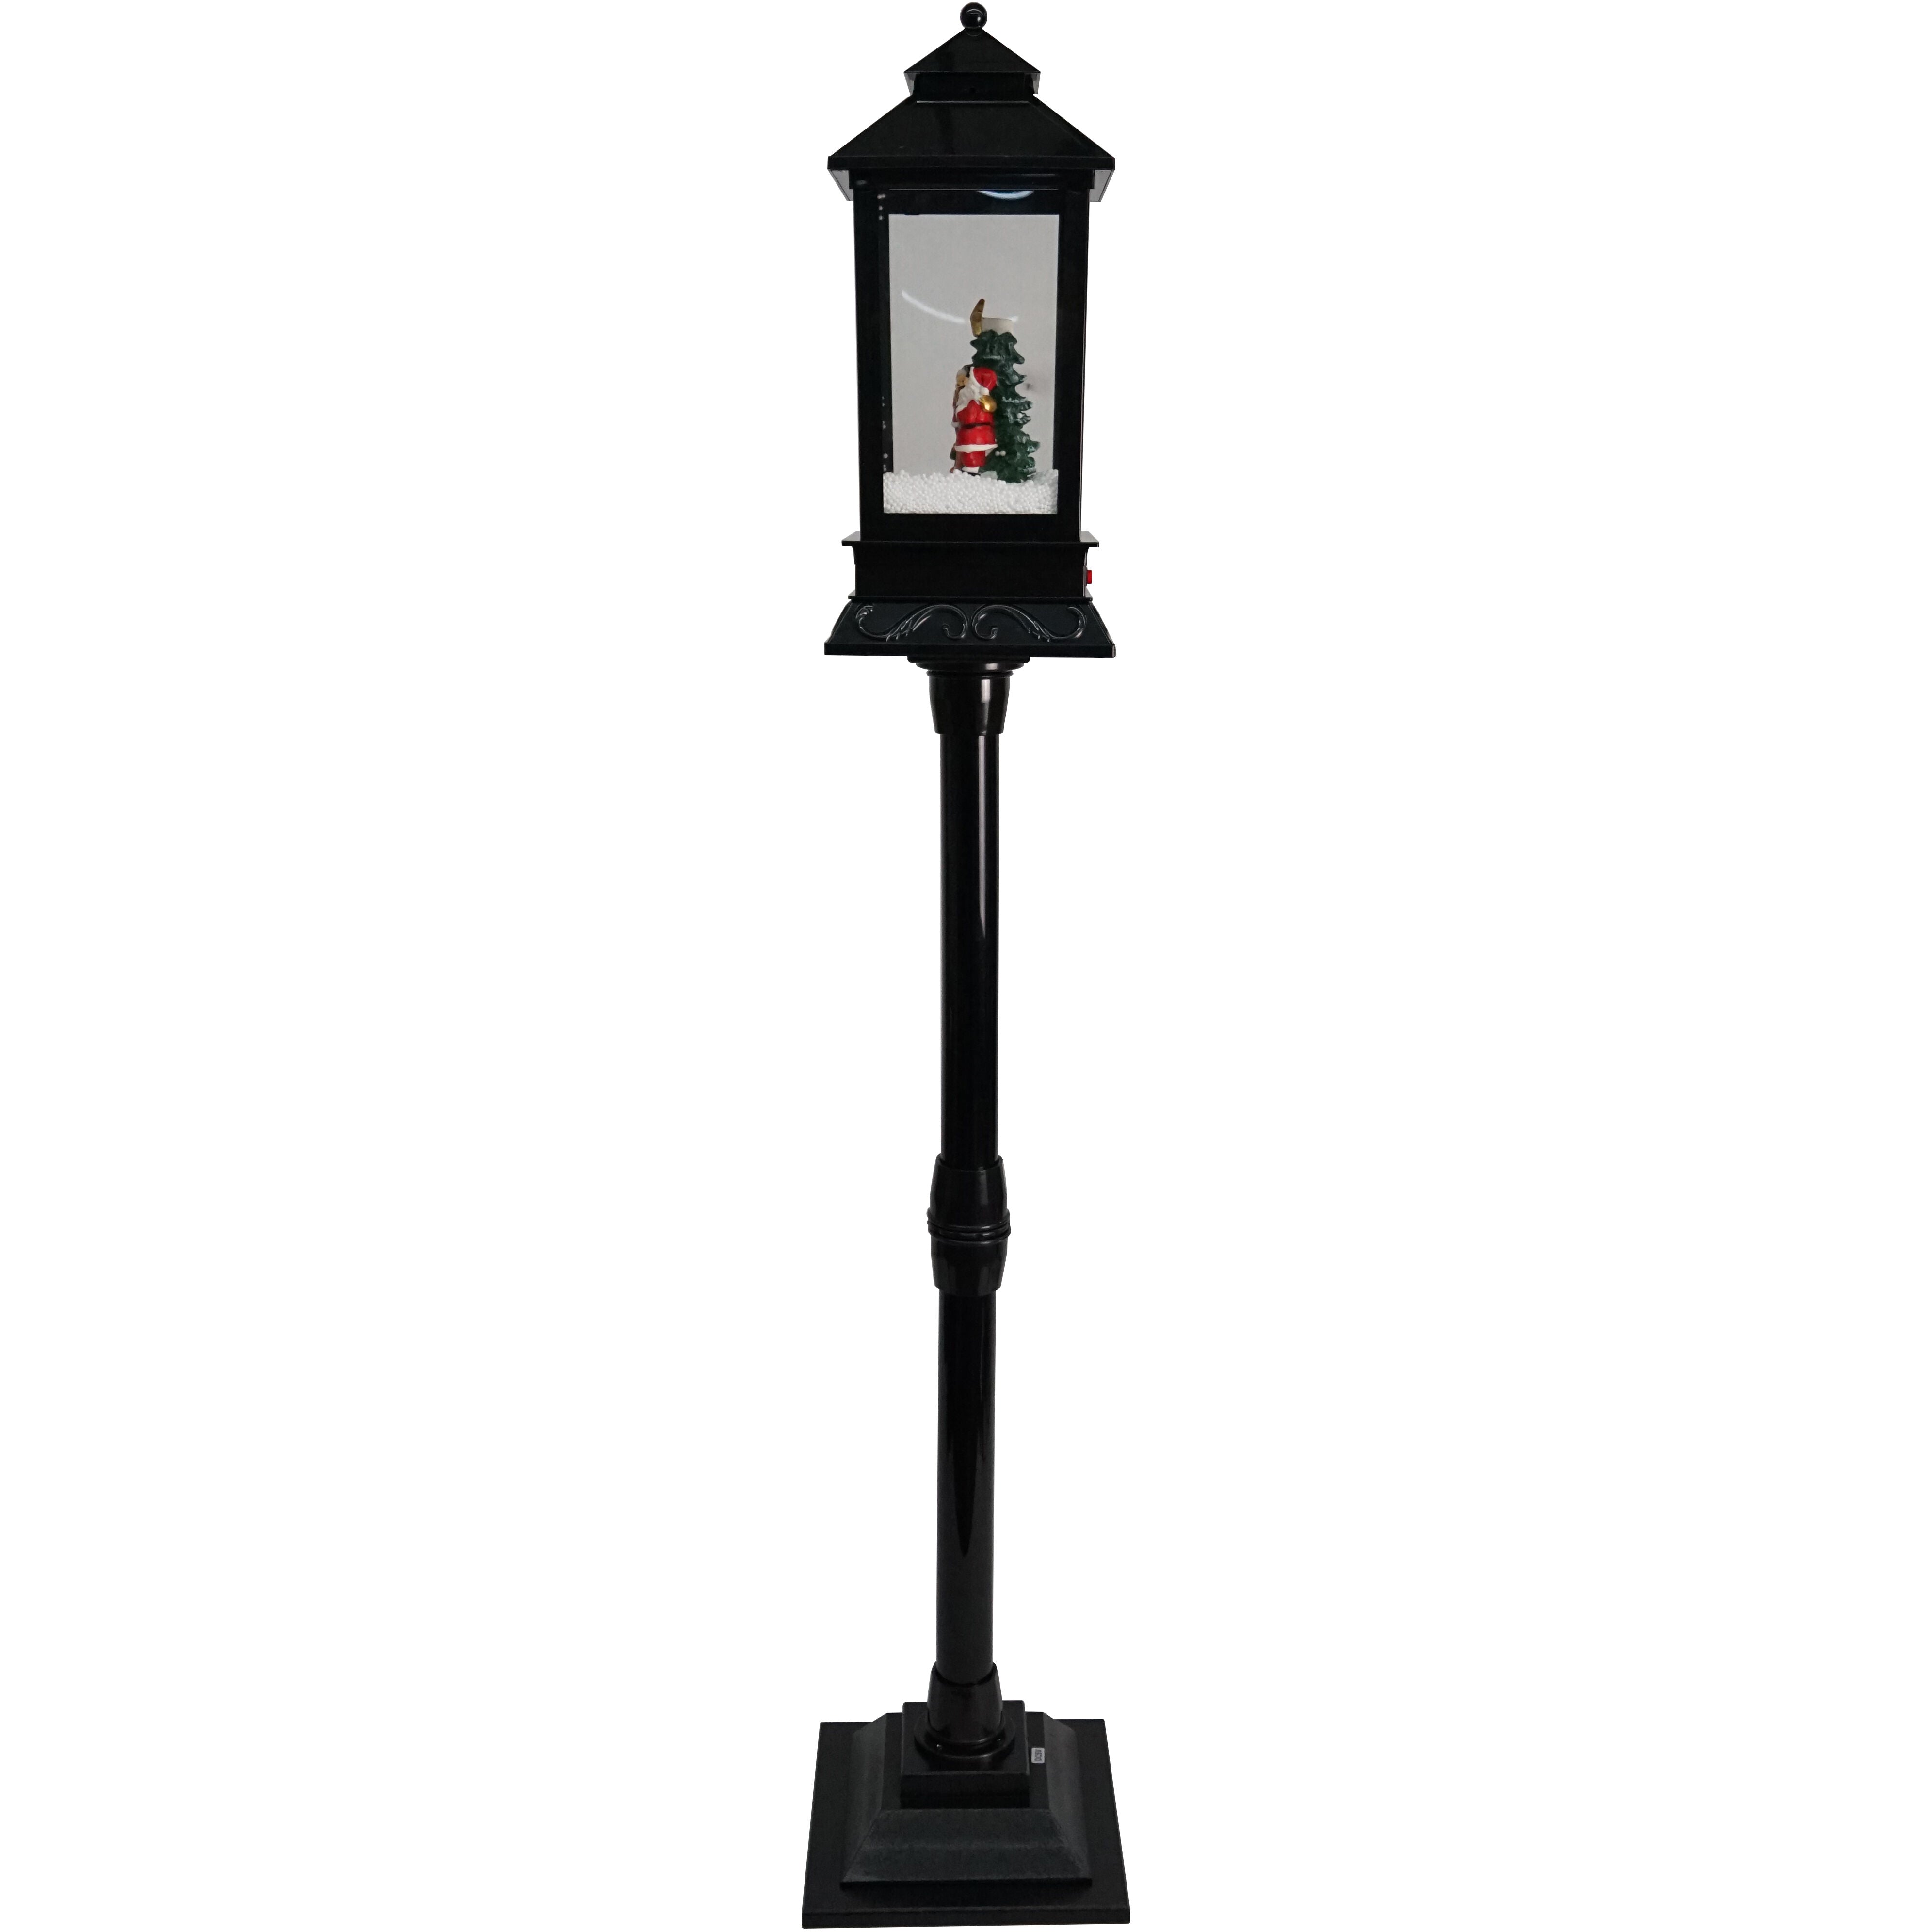 Fraser Hill Farm -  Let It Snow Series 49-In. Musical Mini Street Lamp w/ Santa and Mrs. Claus Scene, Cascading Snow, and Christmas Carols, Black